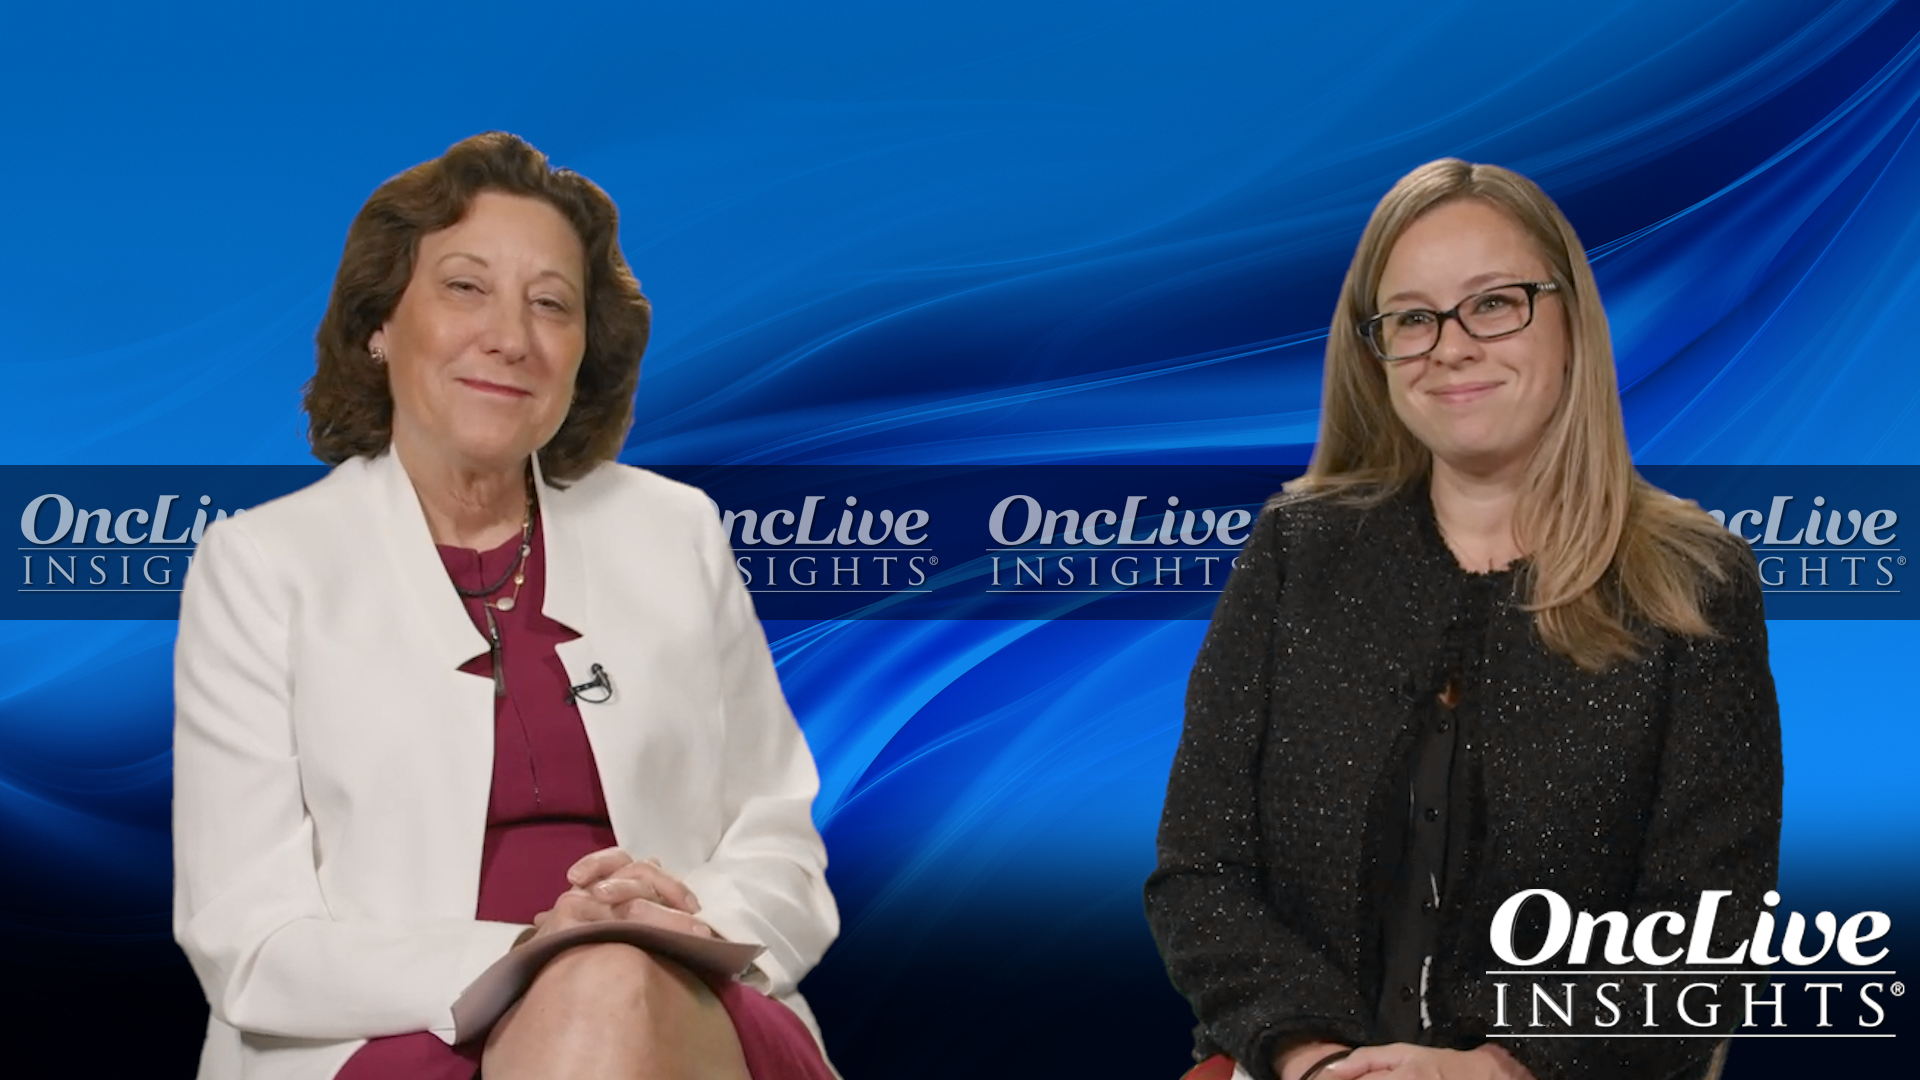 Video 5 - "AE Management with CDK4/6 Inhibitors: Strategies for Treatment Continuity and Optimal Patient Outcomes"